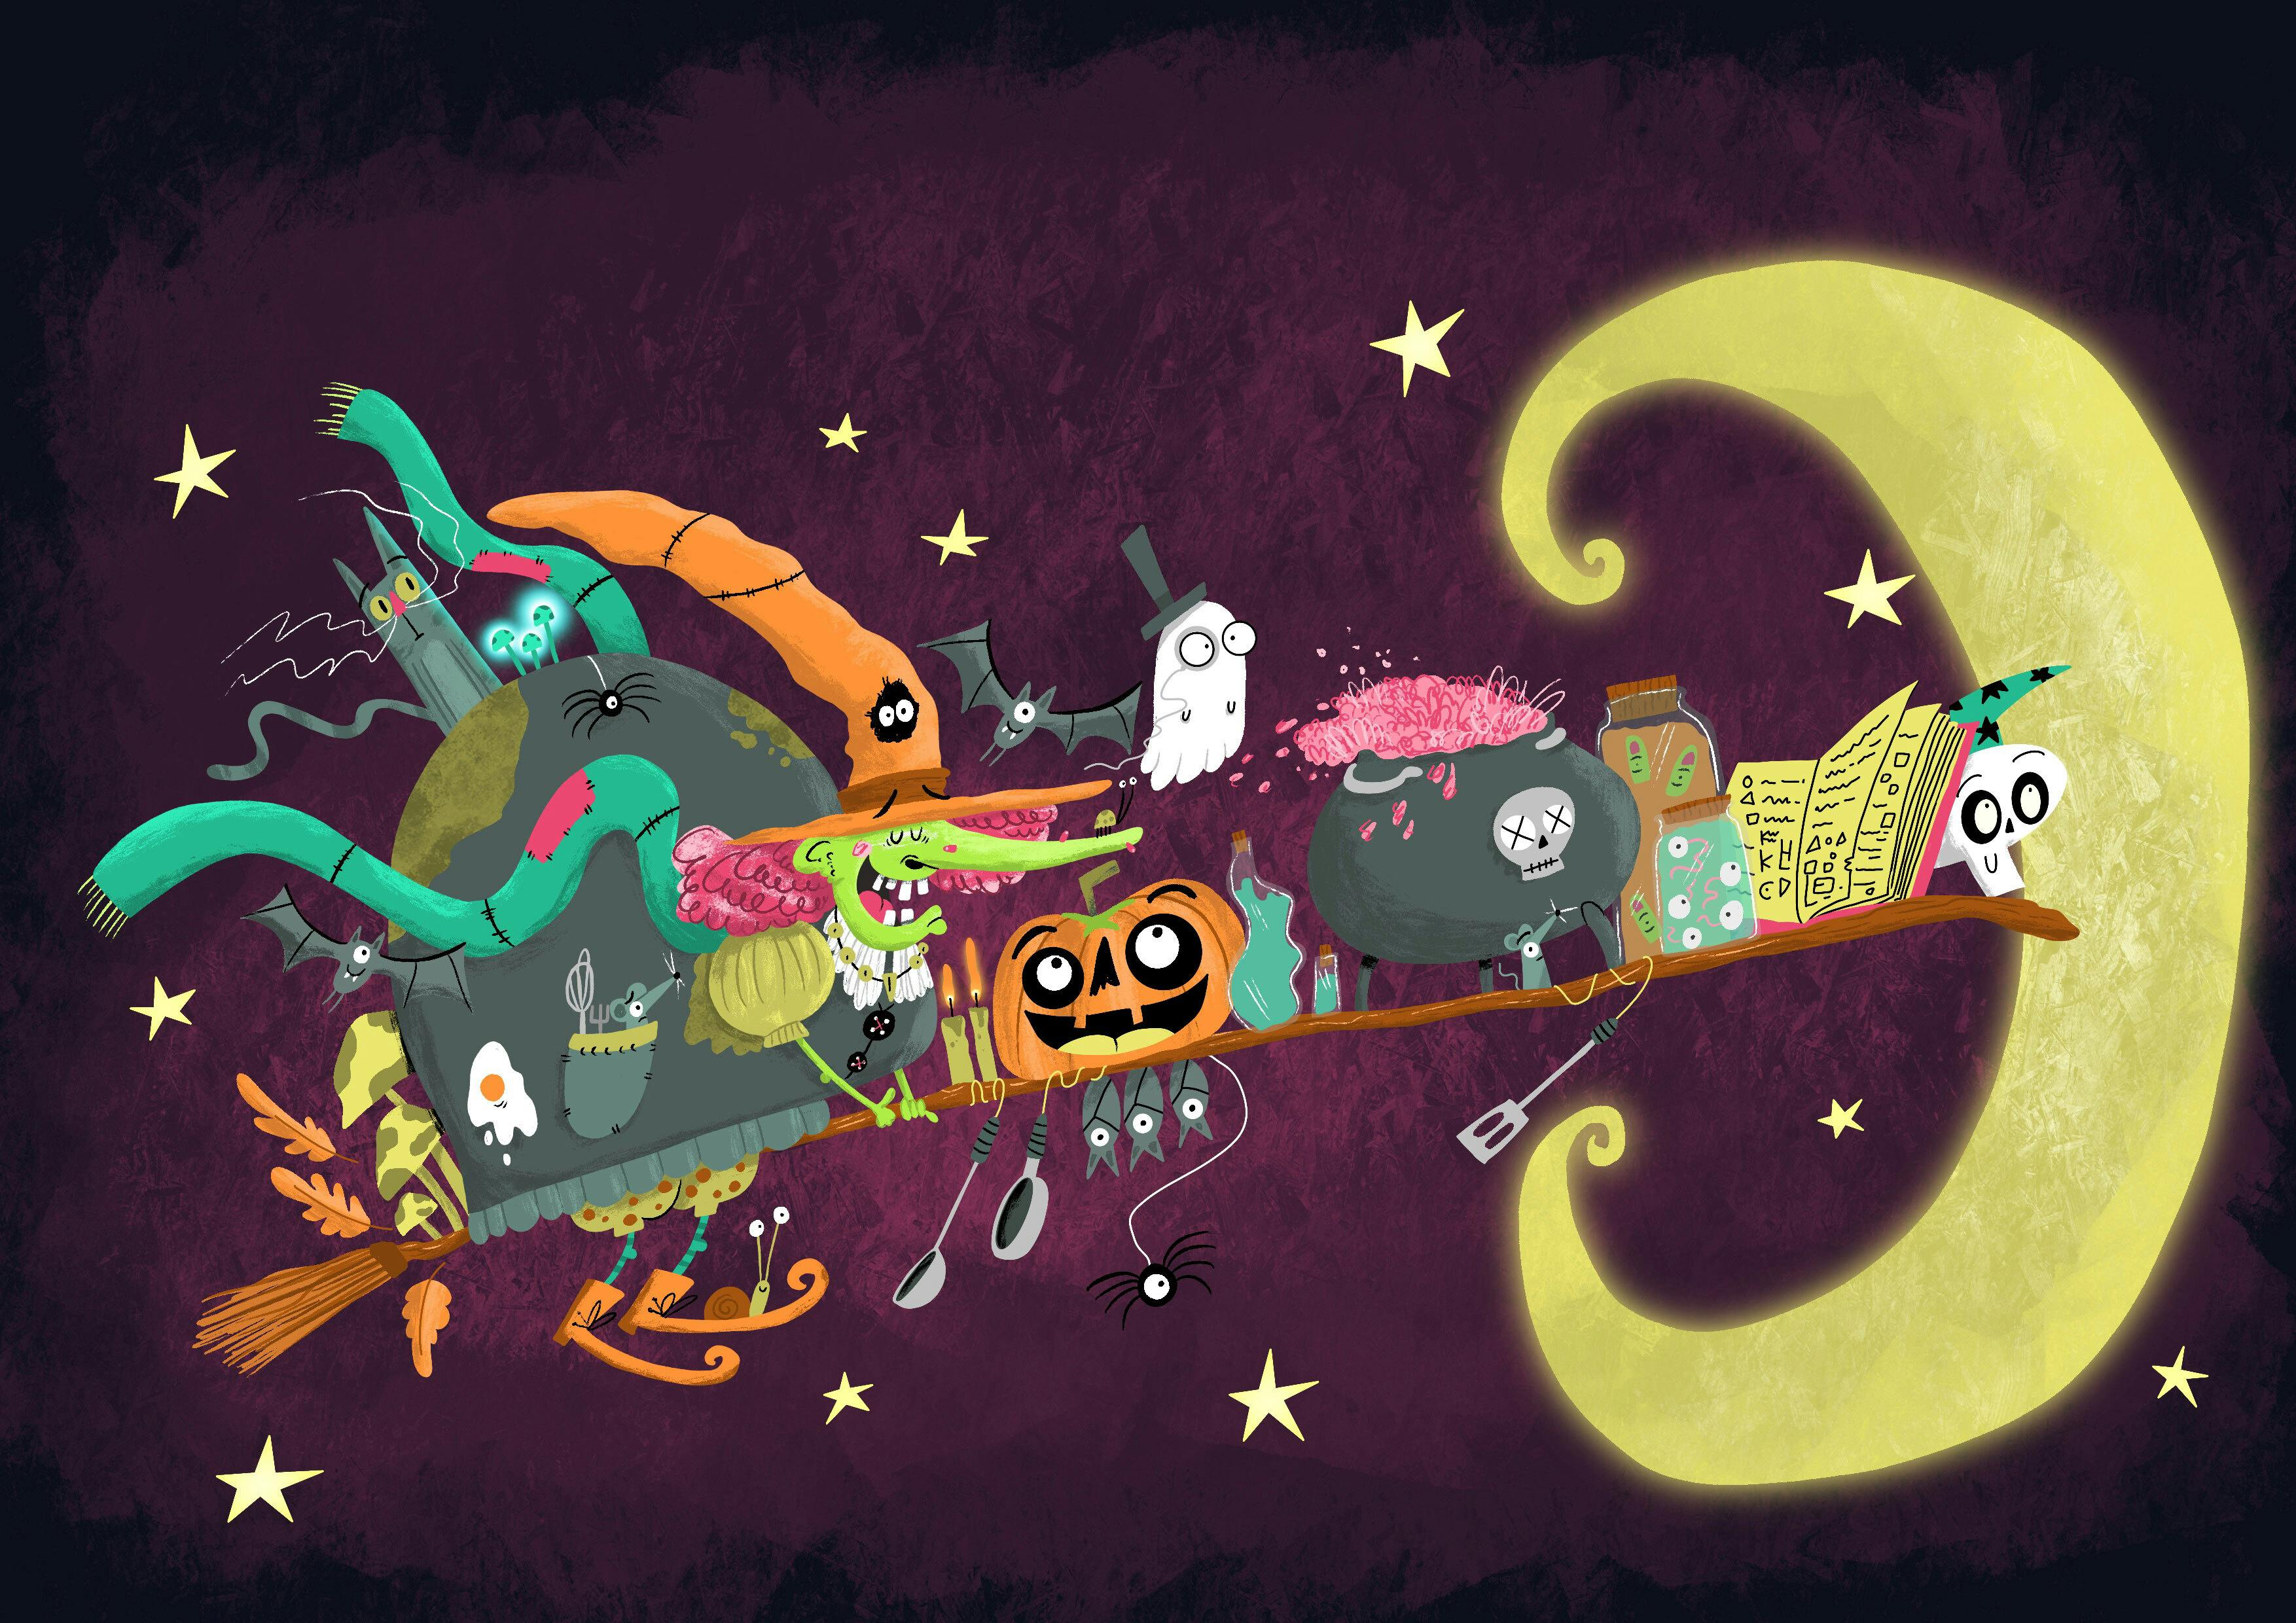 An illustration of a witch on a broomstick with a large crescent moon with a face in the background and lots of animated creatures on the broomstick